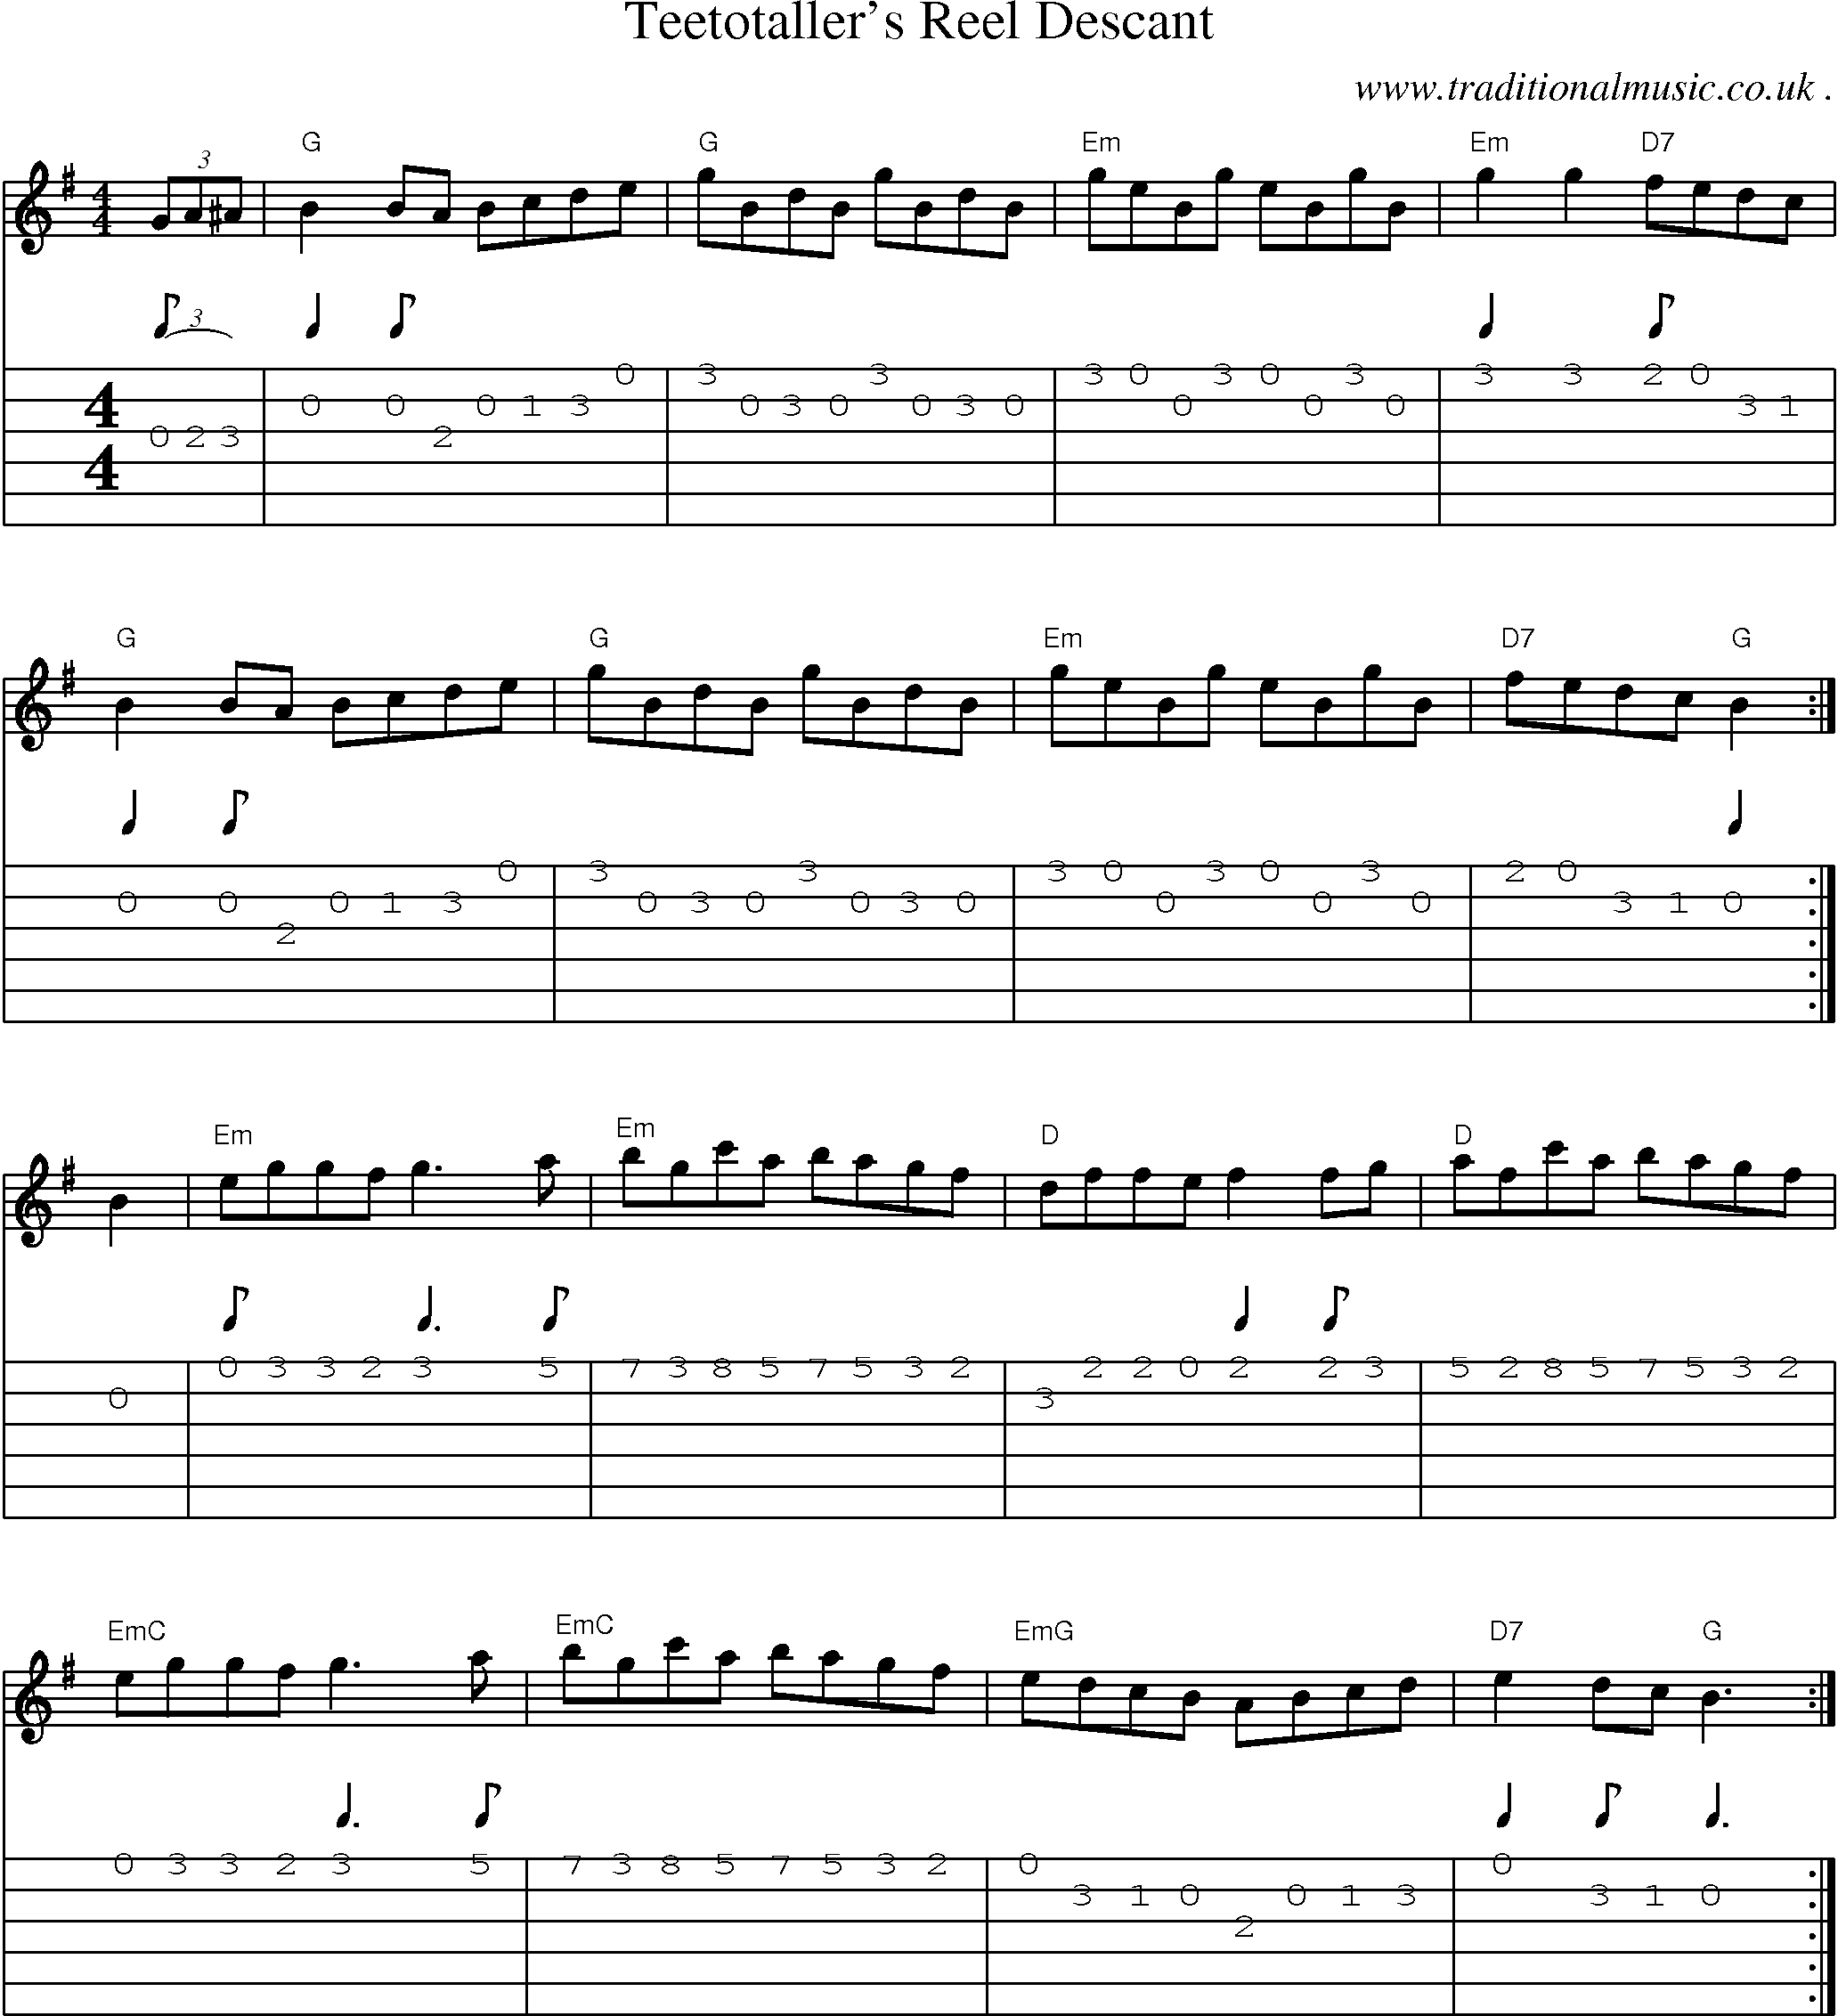 Sheet-Music and Guitar Tabs for Teetotallers Reel Descant